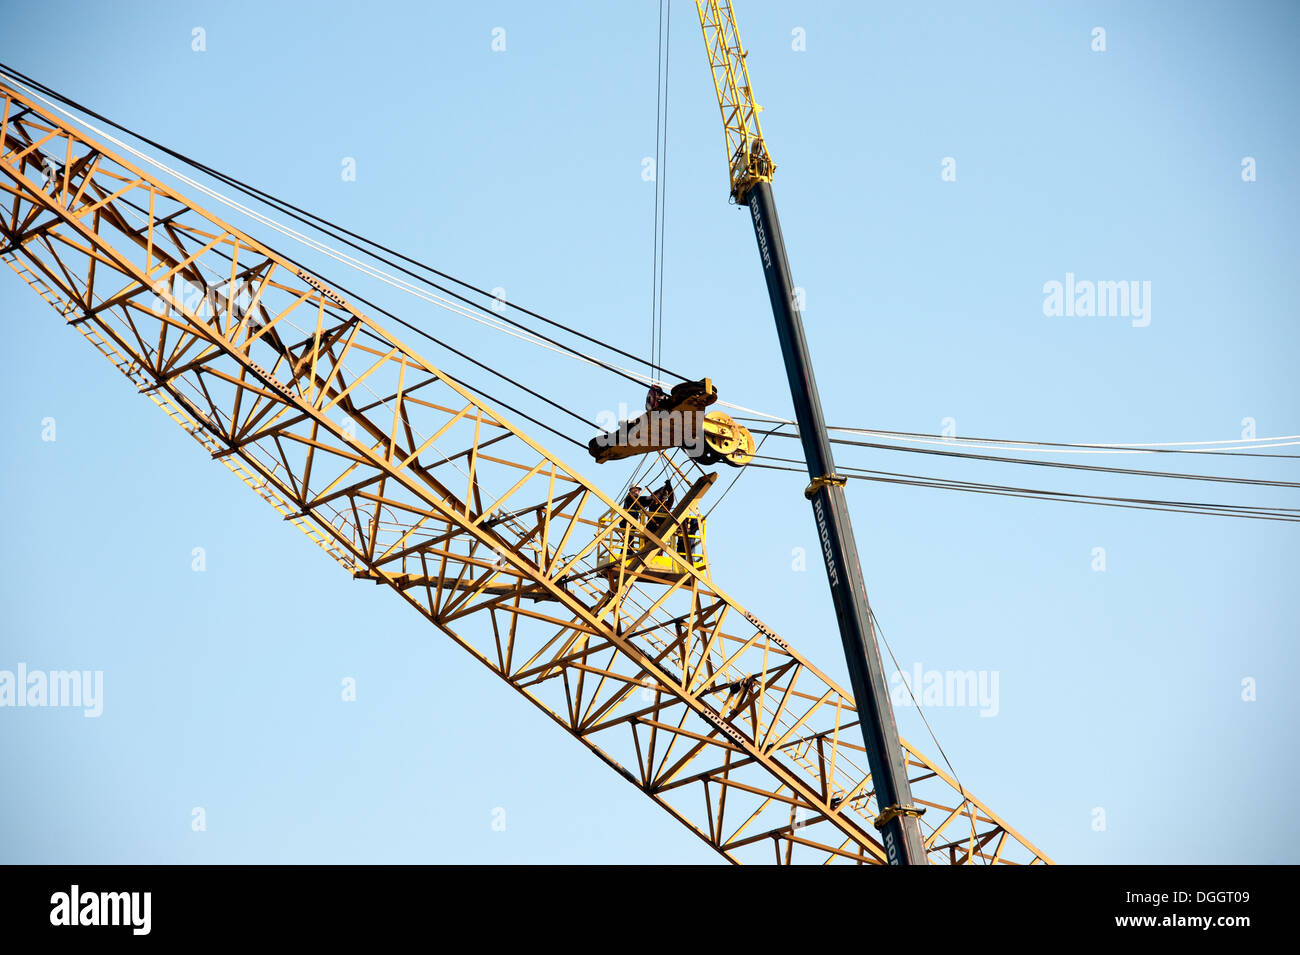 Large Crane being repaired by another crane Stock Photo